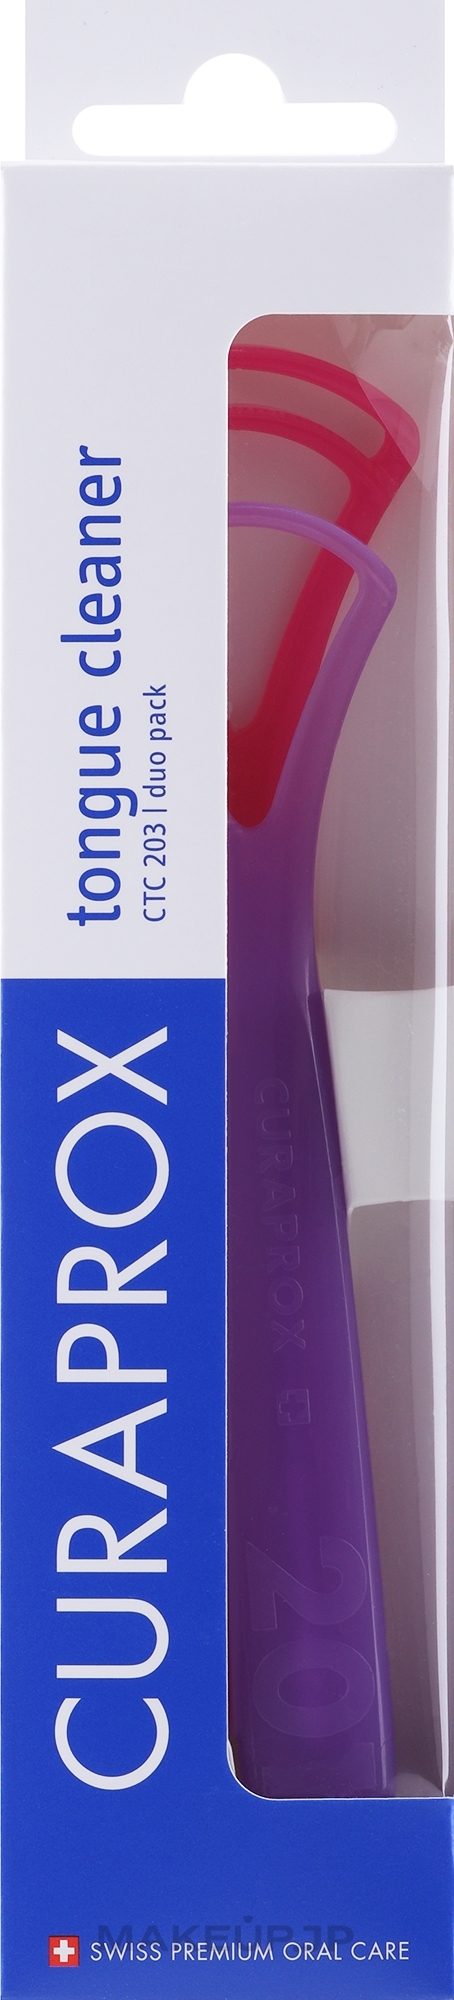 Tongue Cleaner Set CTC 203, pink + purple - Curaprox Tongue Cleaner — photo 2 szt.